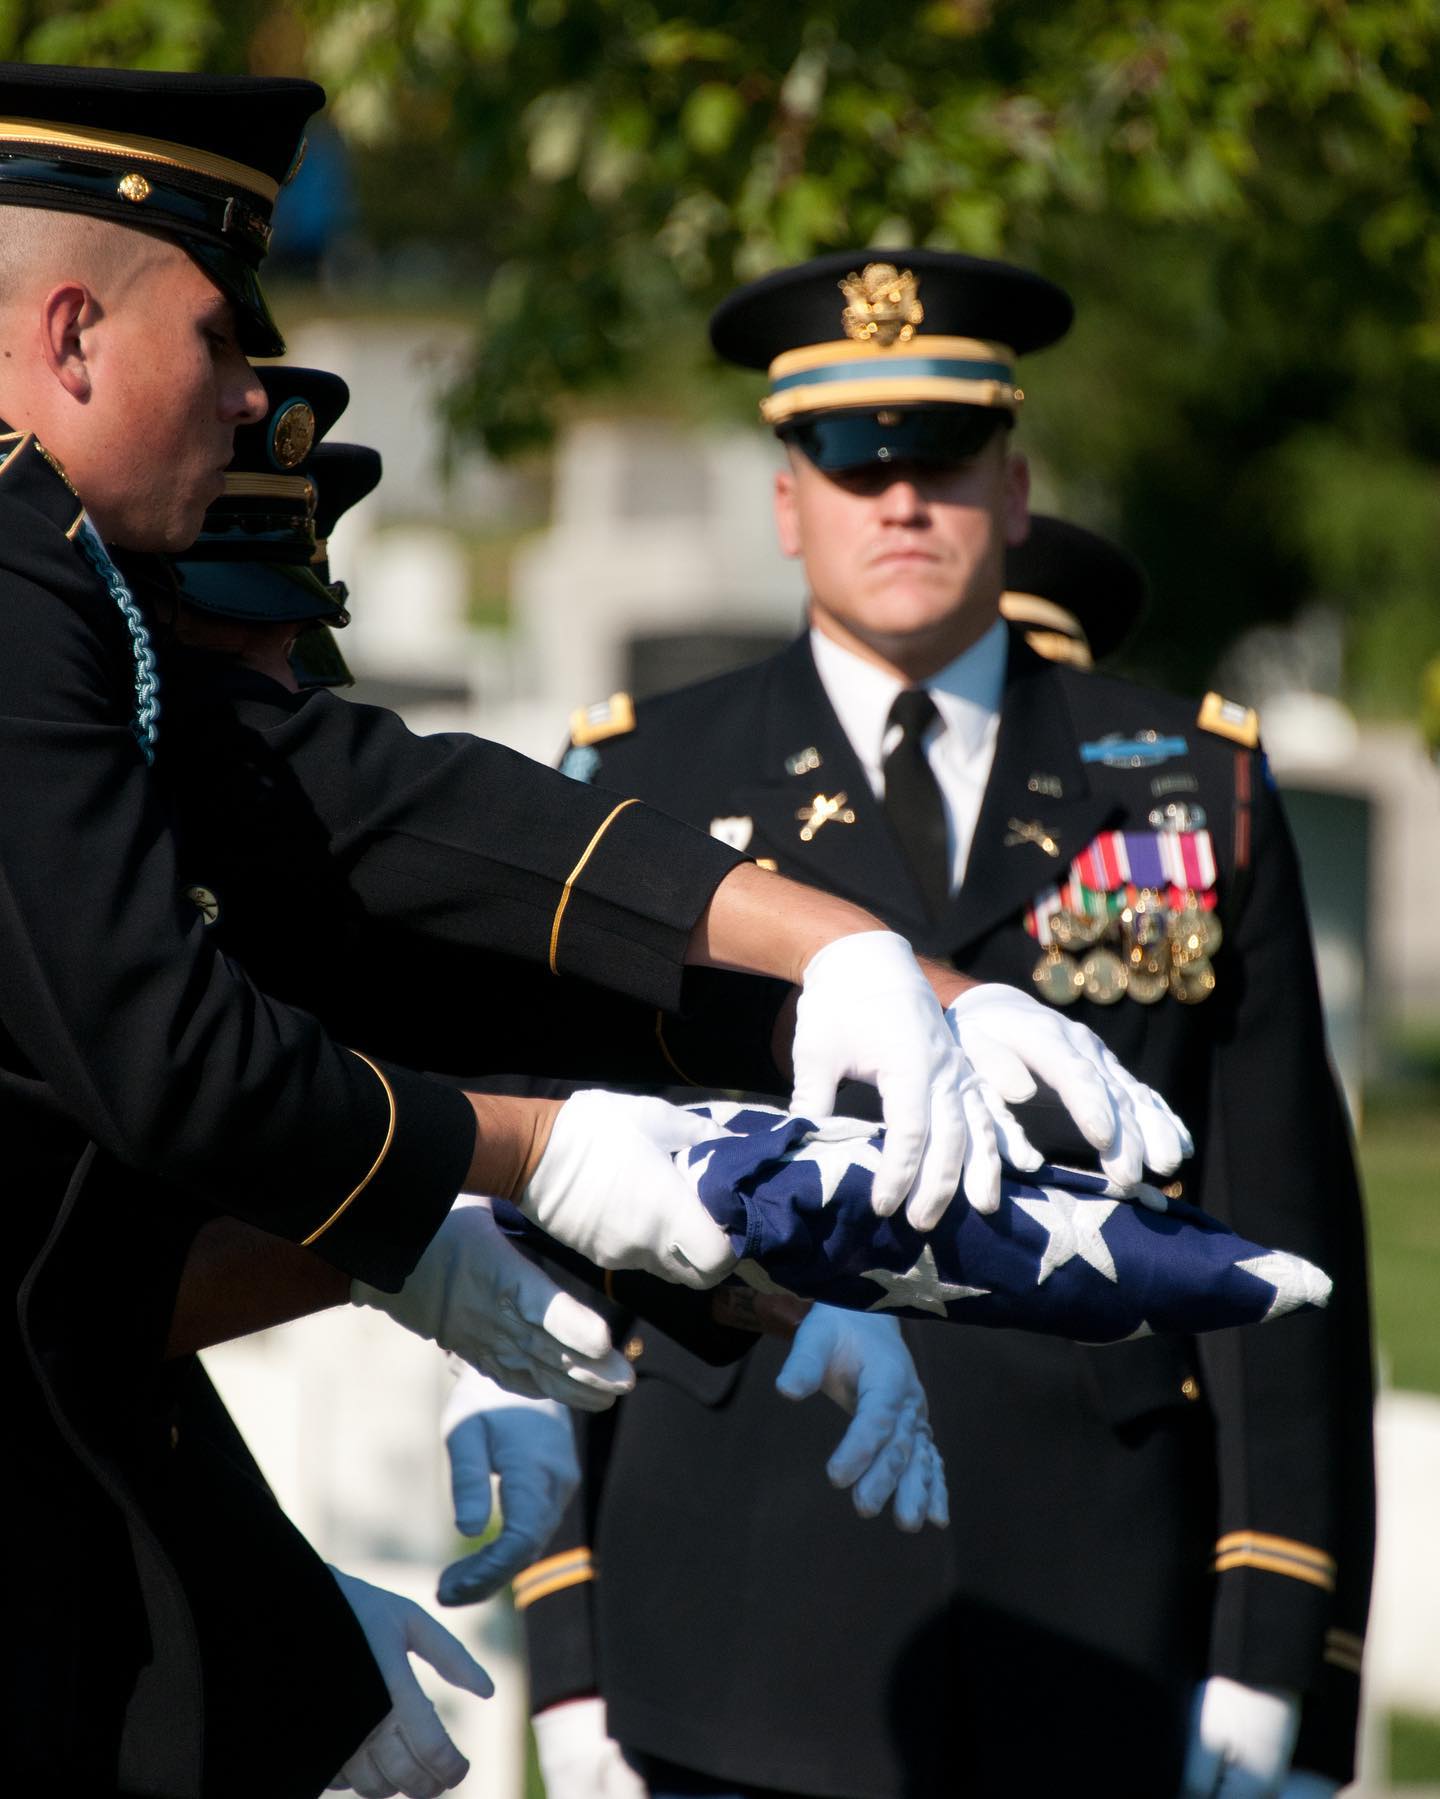 Soldiers in the 3d US Infantry Regiment, The Old Guard hold a perfectly folded flag over the casket of a soldier laid to rest in Arlington National Cemetery.

It is the solemn duty and distinct privilege of The Old Guard to render final honors for Service Members as they are laid to rest in Arlington National Cemetery.